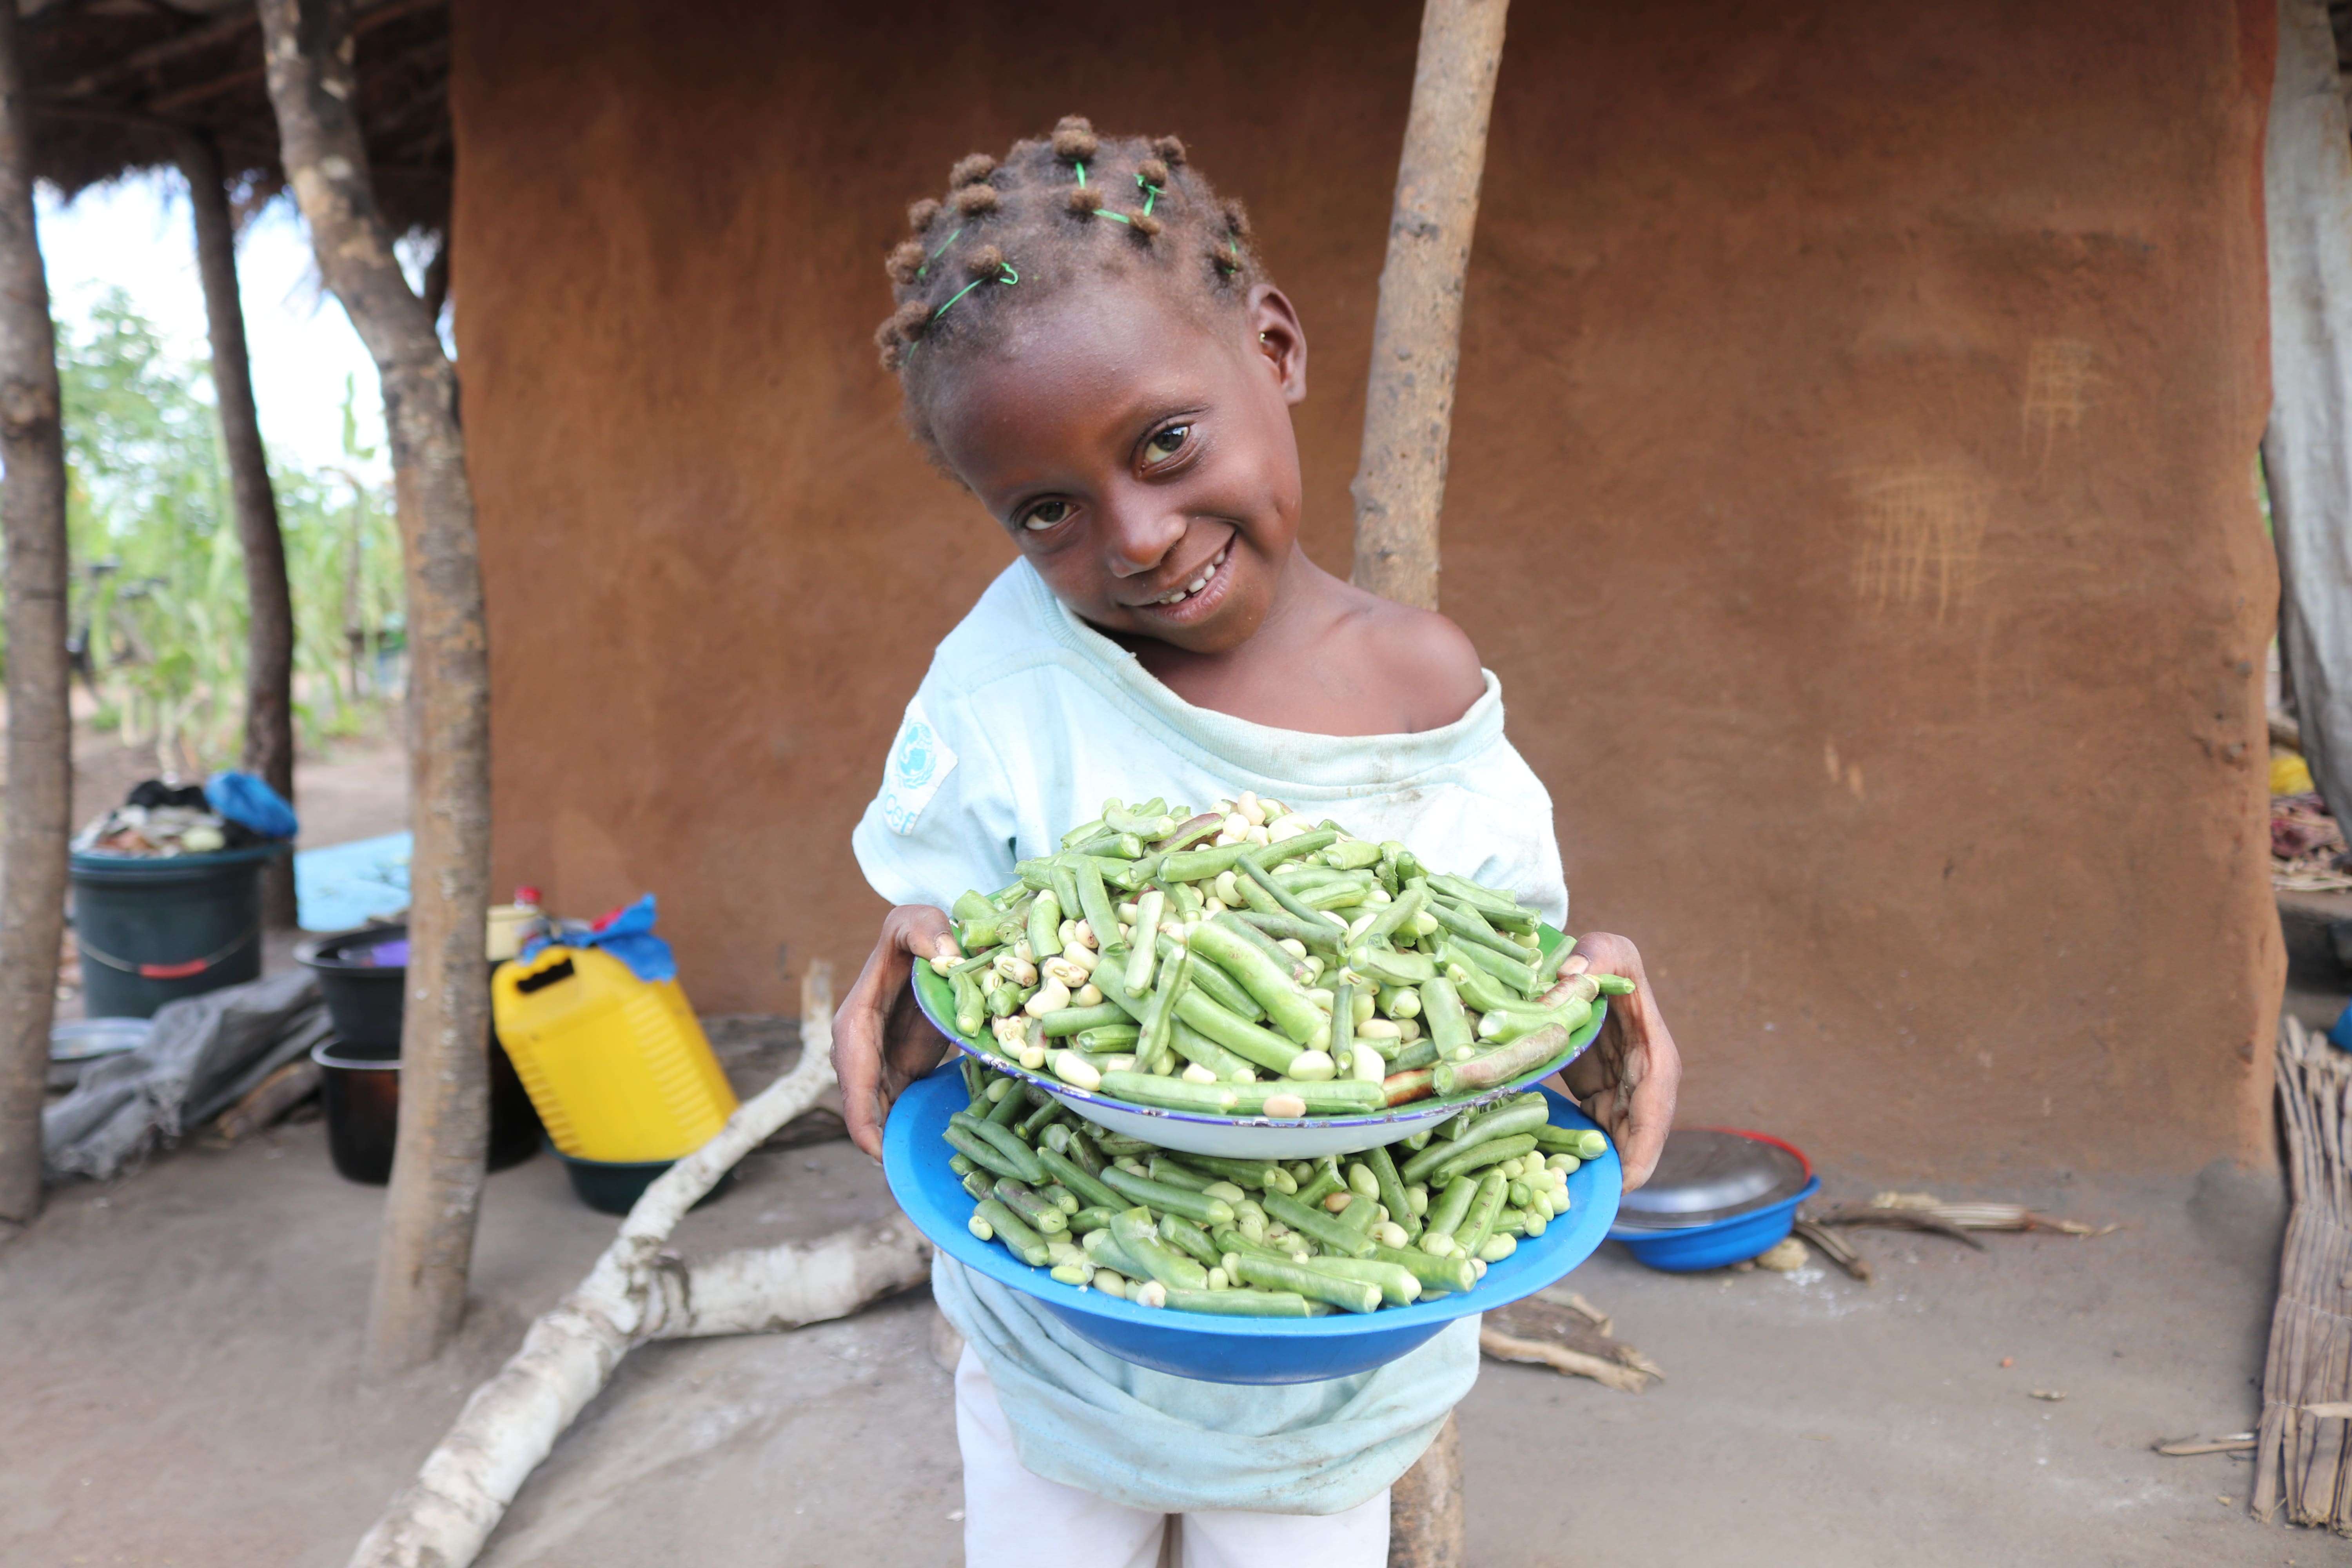 Rosa holds a plate of beans after her grandma Luisa harvesting from kitchen garden